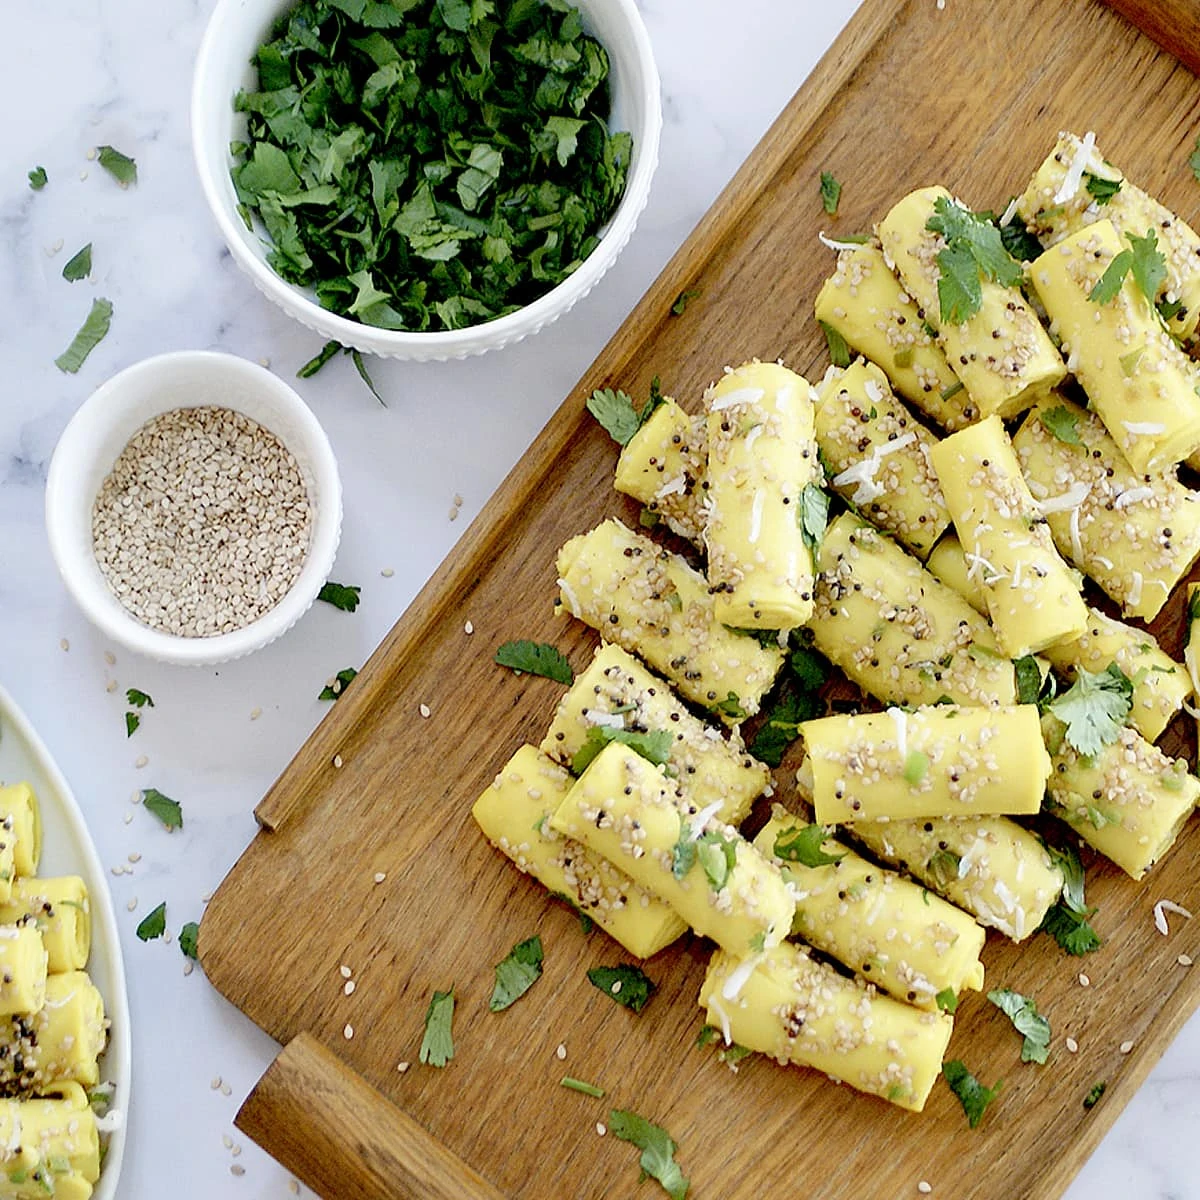 Gujarati Khandvi in a wooden board garnished with cilantro and sesame seeds